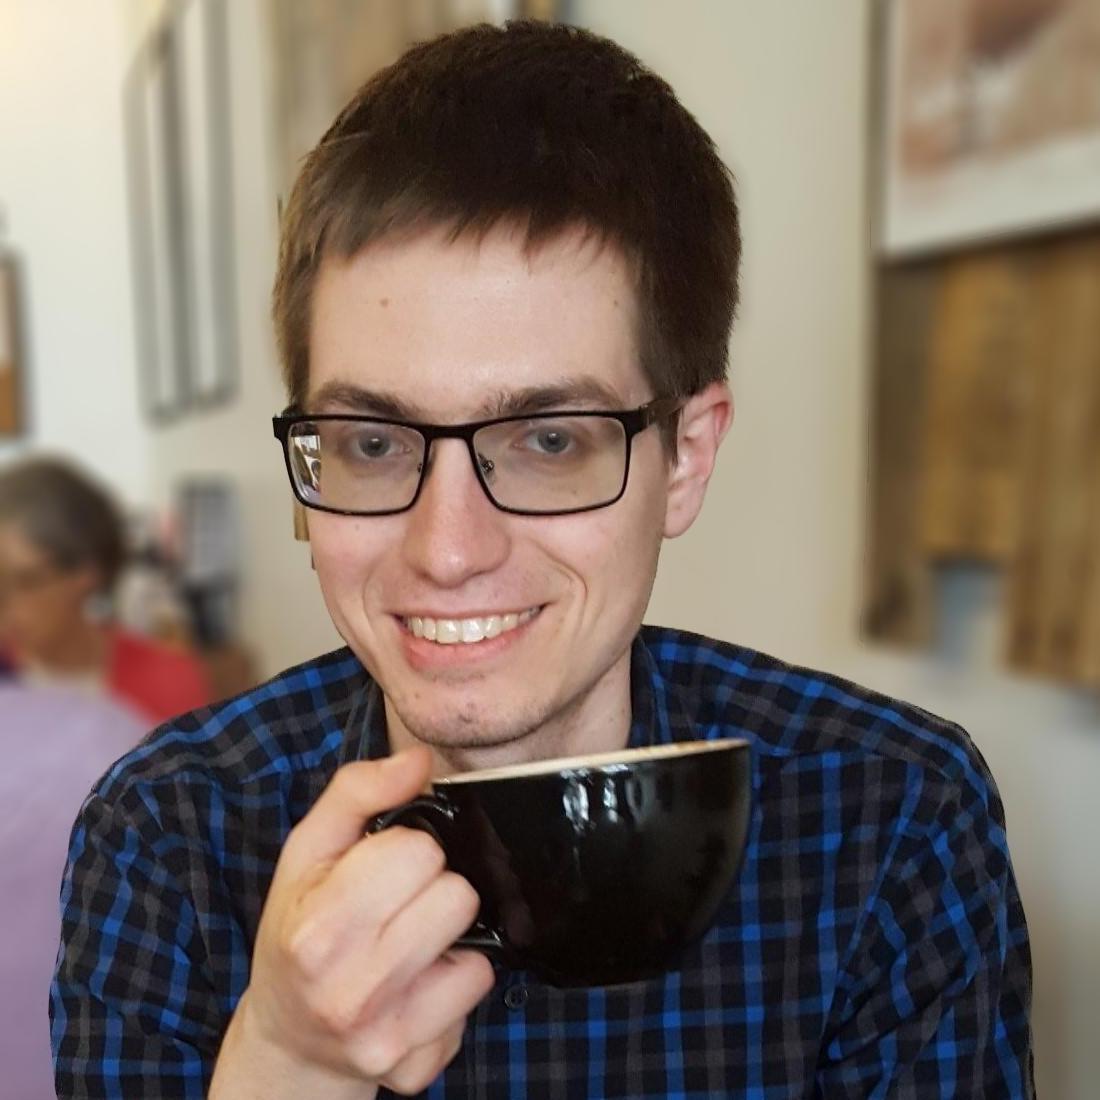 Adam Sychla holds a cup of (presumably) coffee